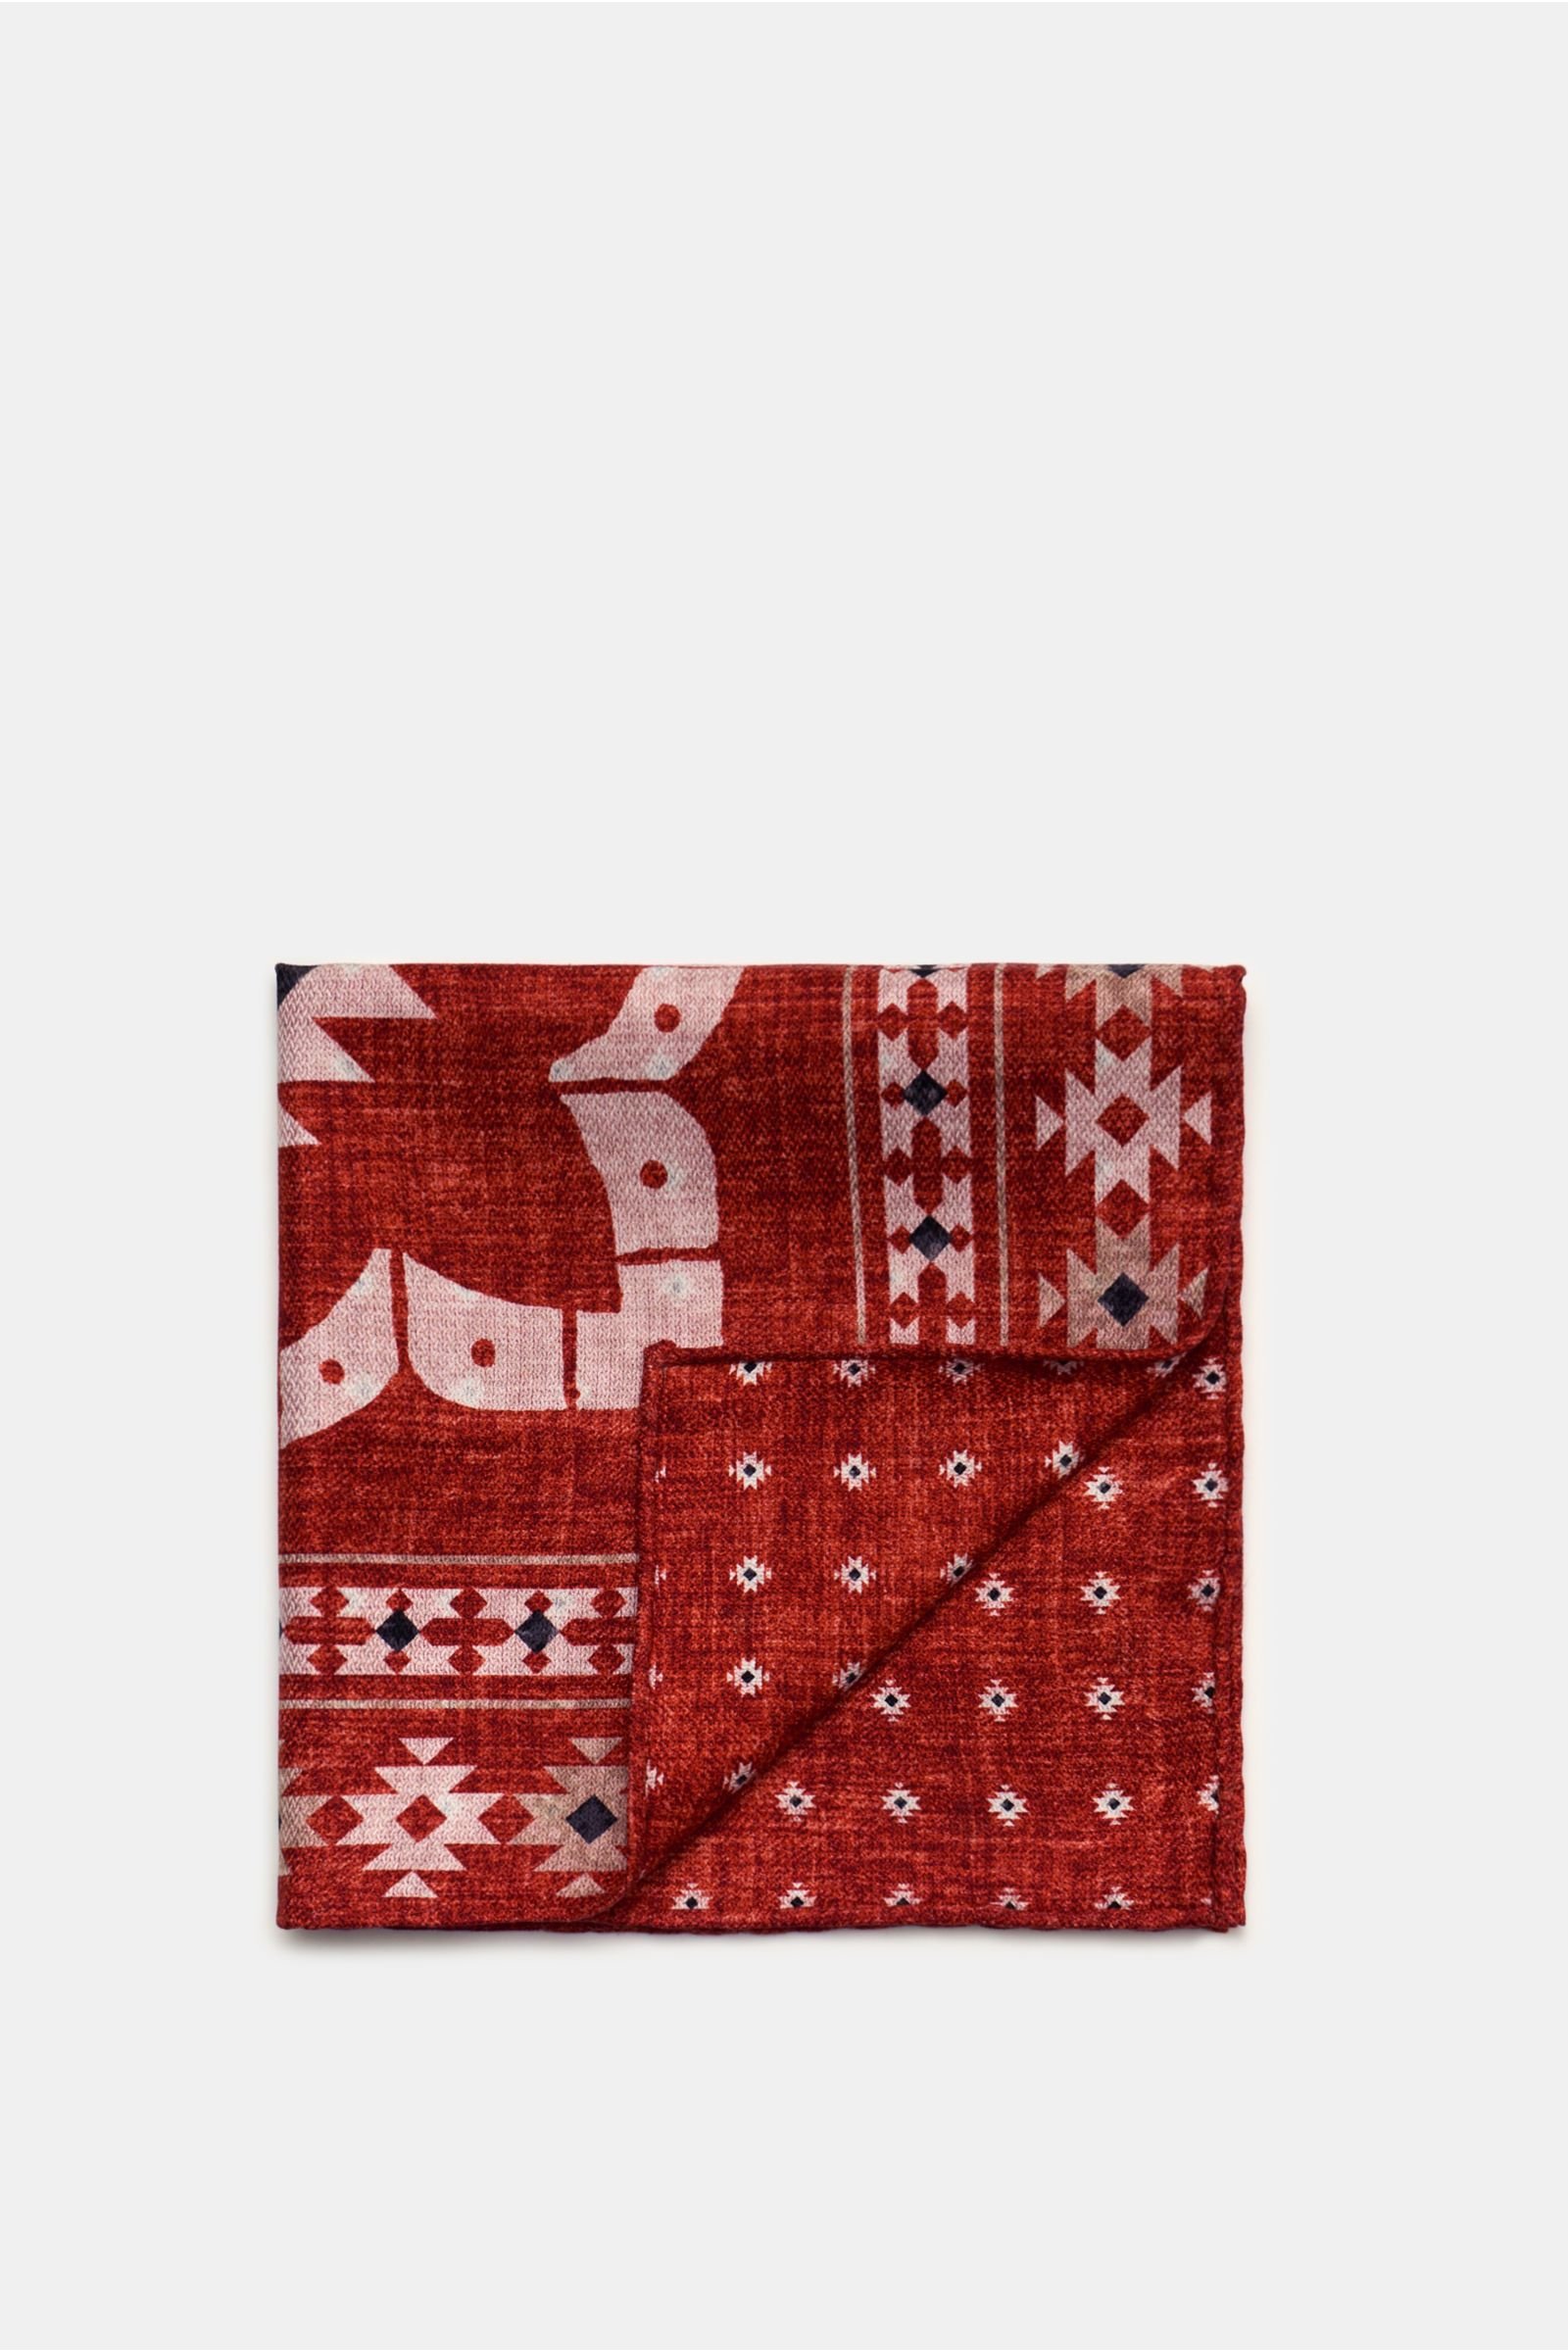 Pocket square rust-red/cream patterned